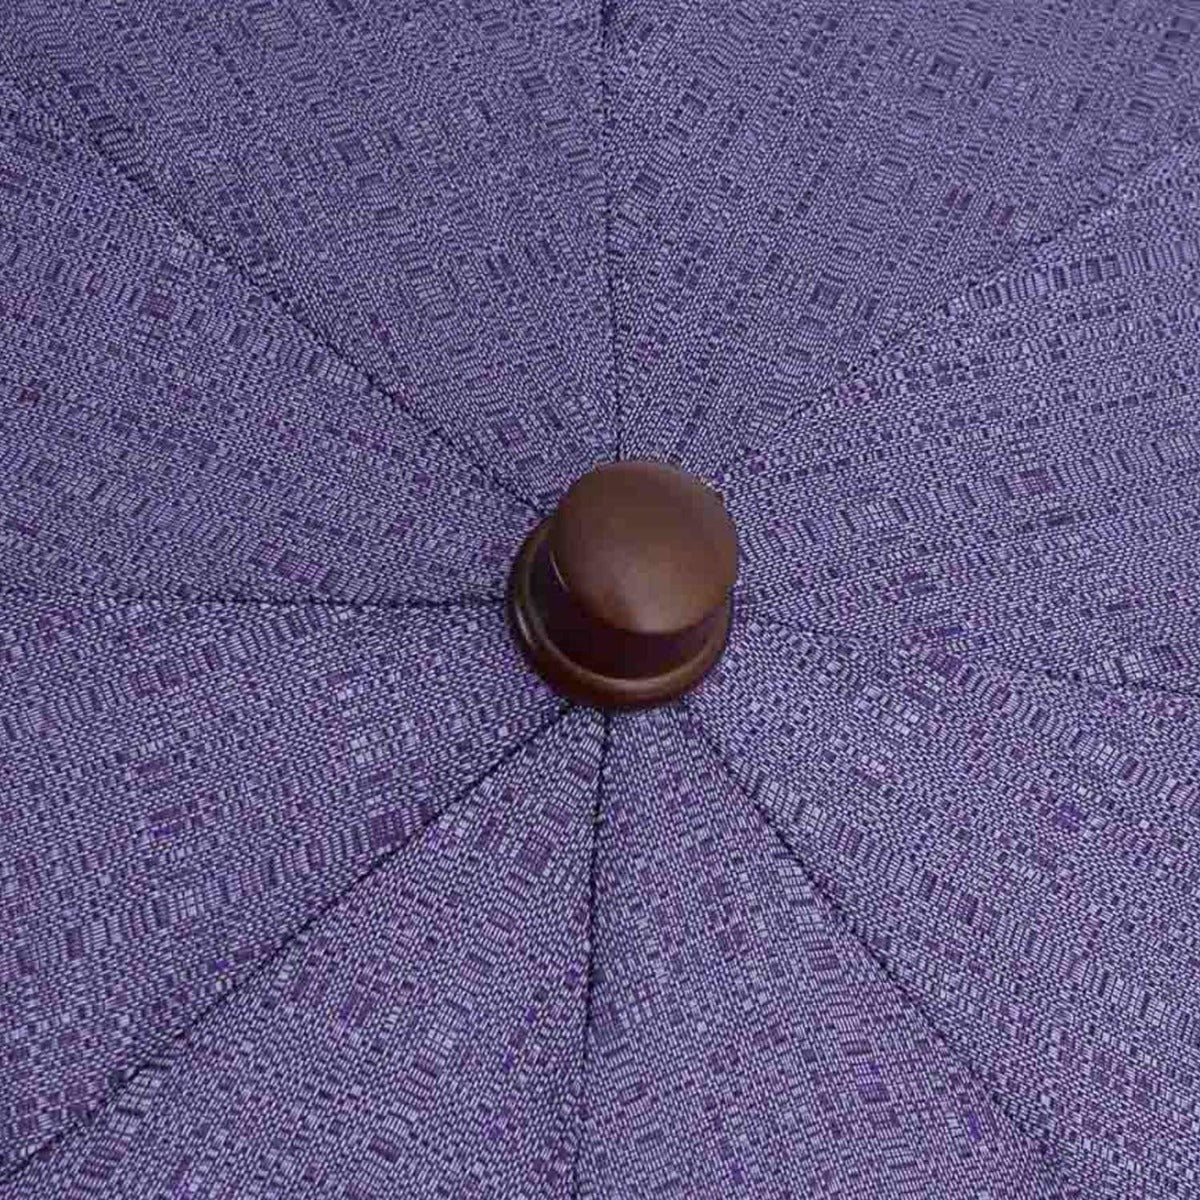 An Imperial Purple Travel Umbrella with a maple wood handle from KirbyAllison.com.